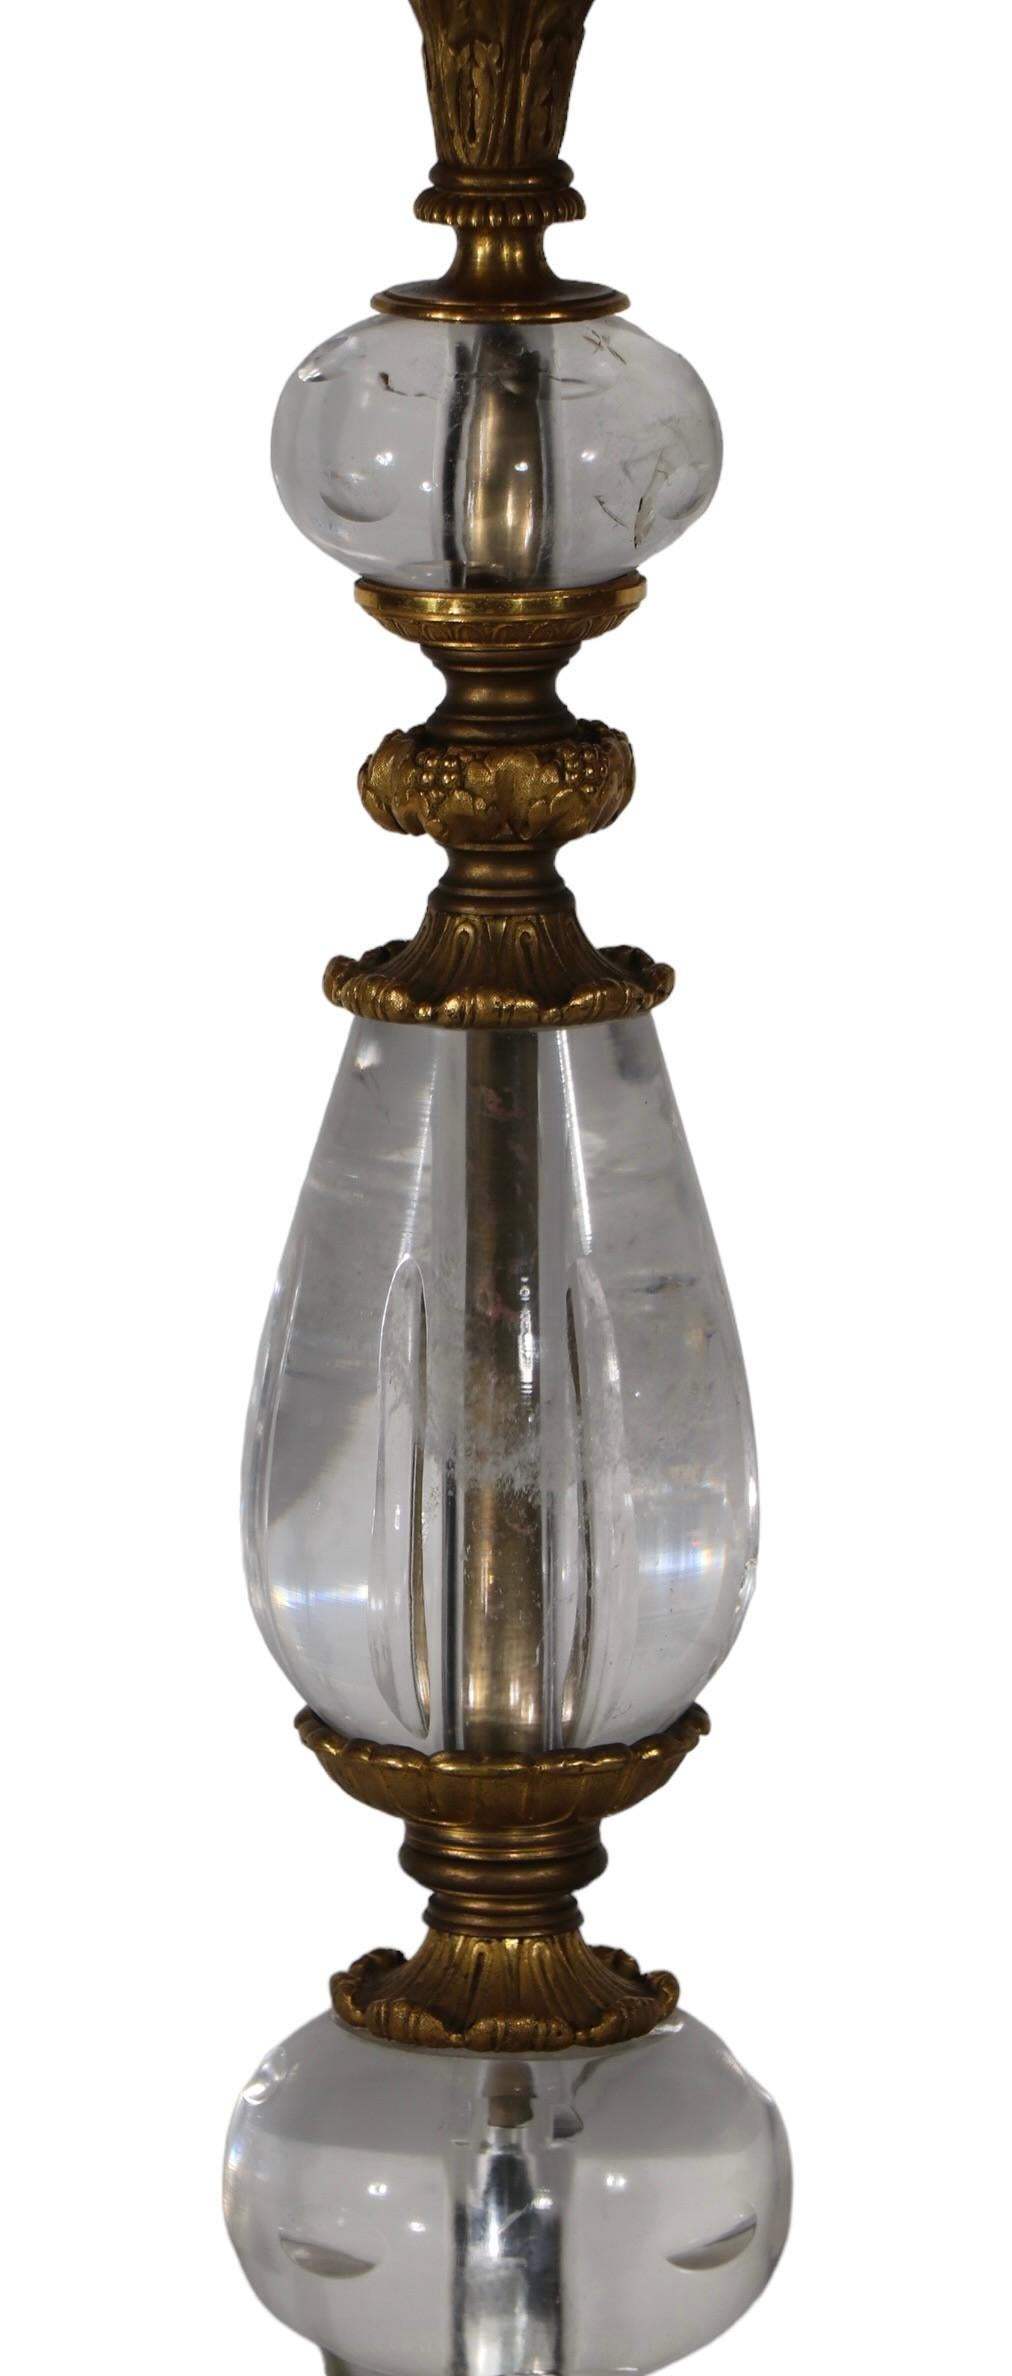   19th C French Bronze Ormolu and Rock Crystal Candlestick Table Lamp as is For Sale 11